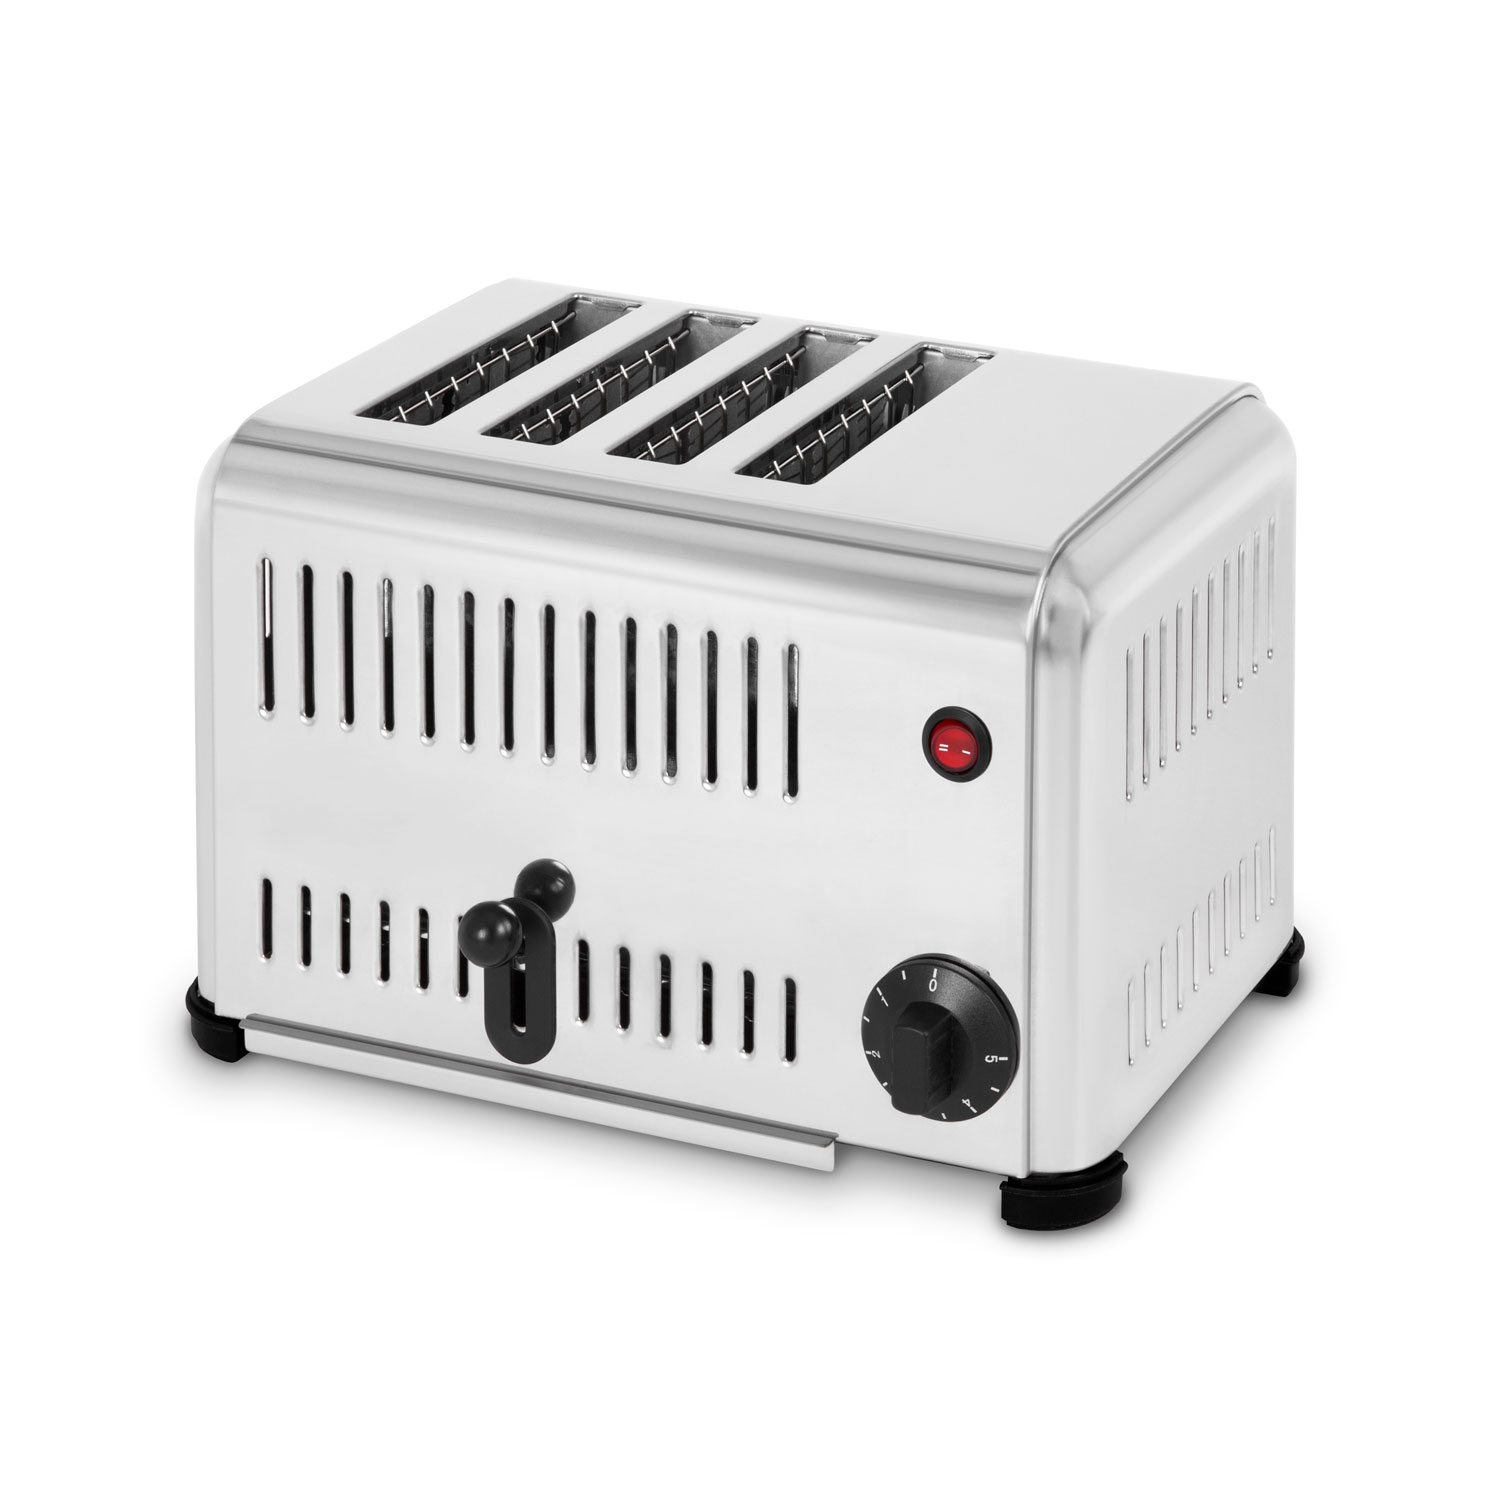 Equipement professionnel cuisine - %category_name% : GRILLE A PATISSERIE  PRO GASTRO